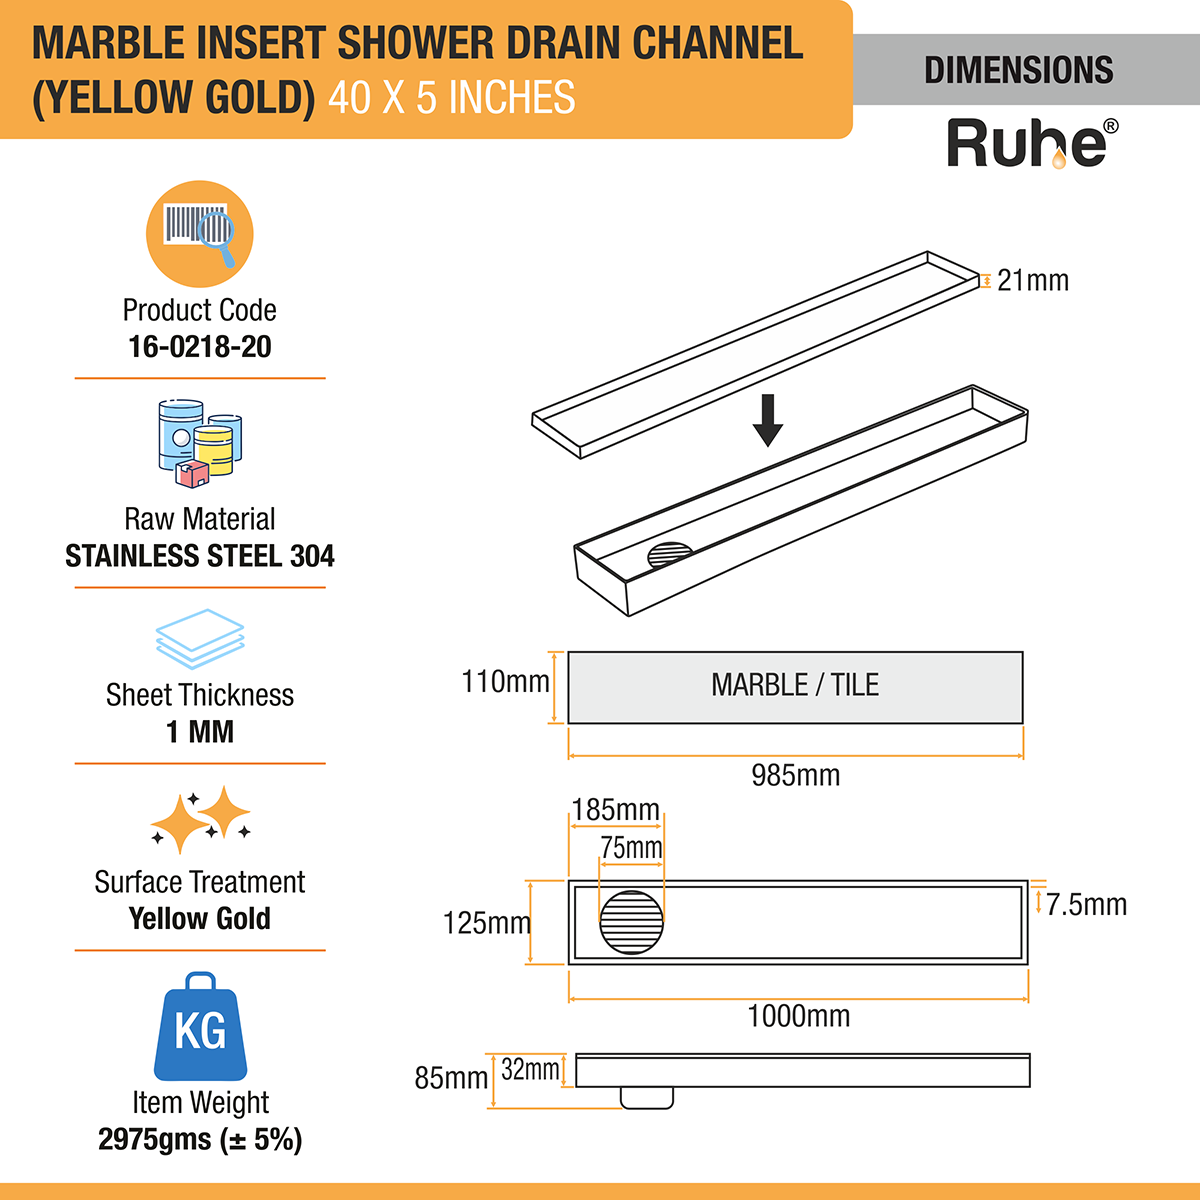 Marble Insert Shower Drain Channel (40 x 5 Inches) YELLOW GOLD PVD Coated dimensions and sizes